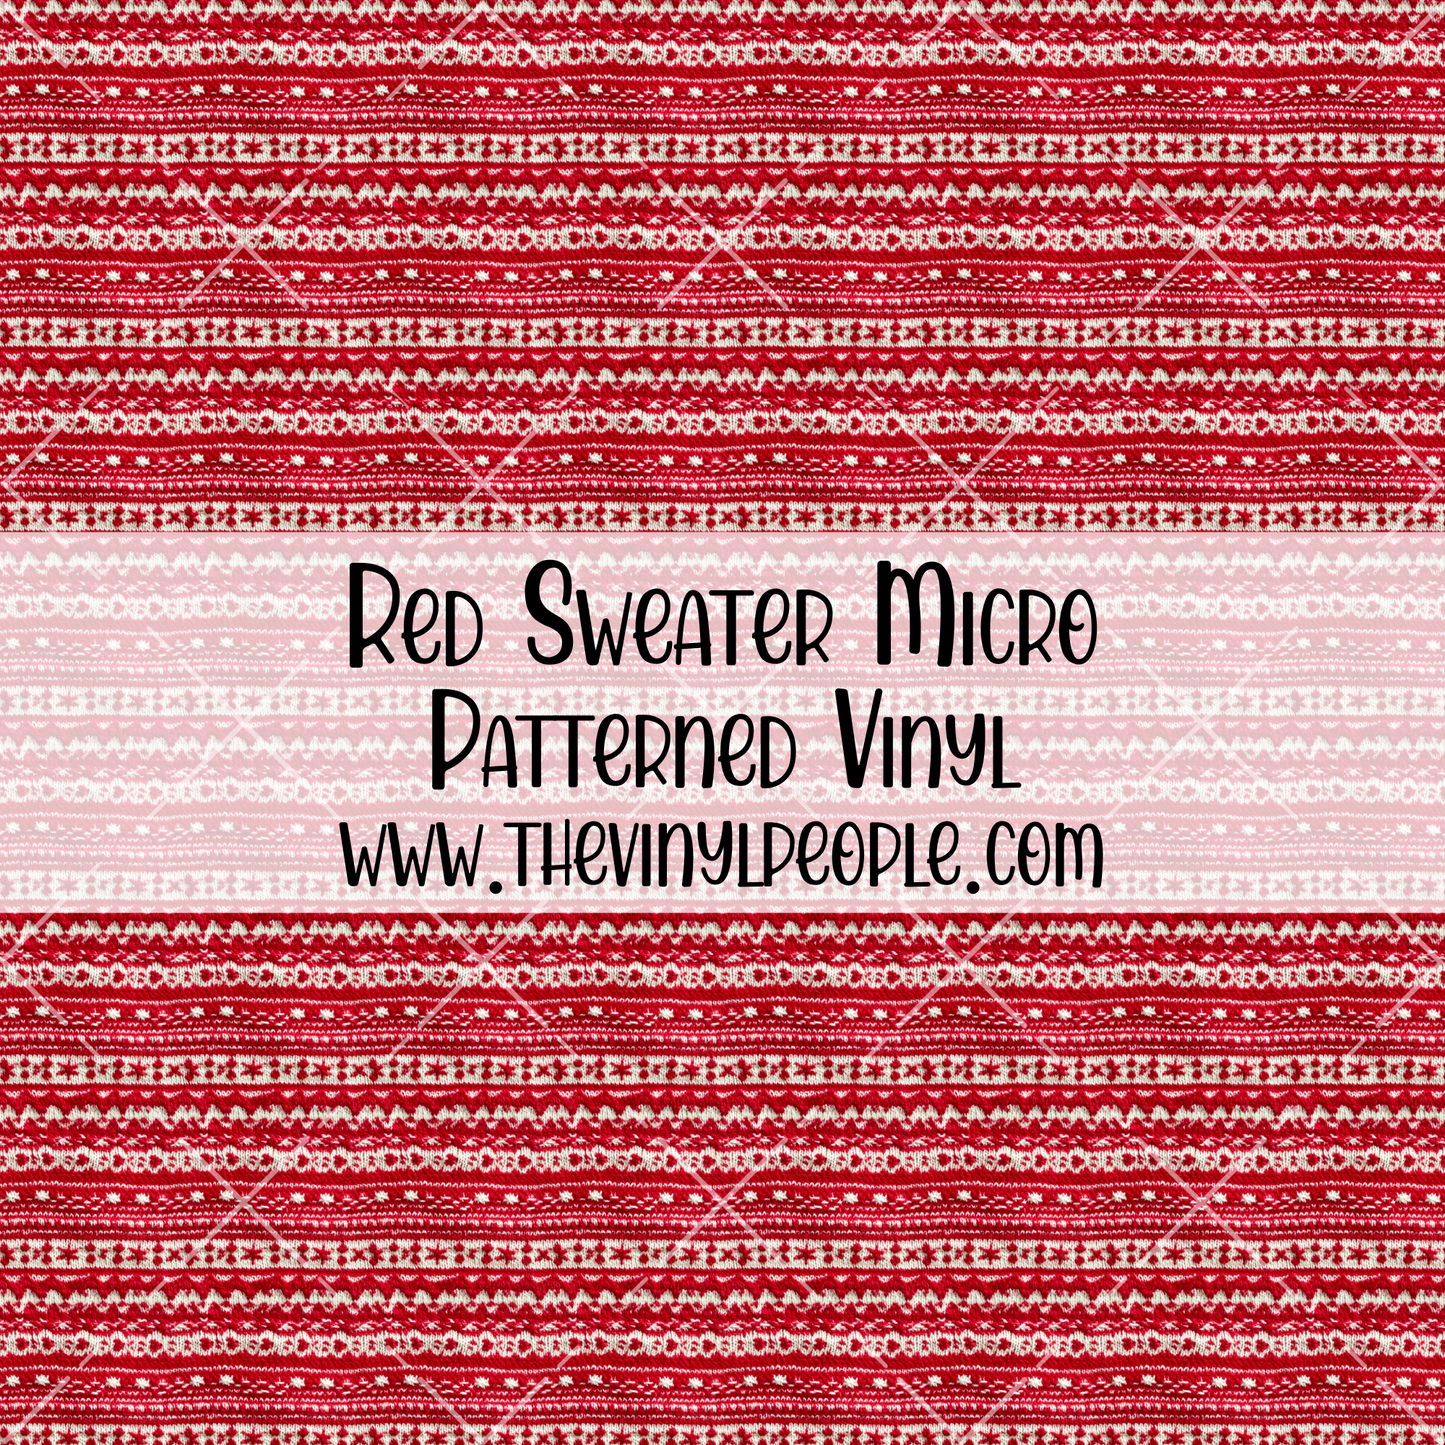 Red Sweater Patterned Vinyl